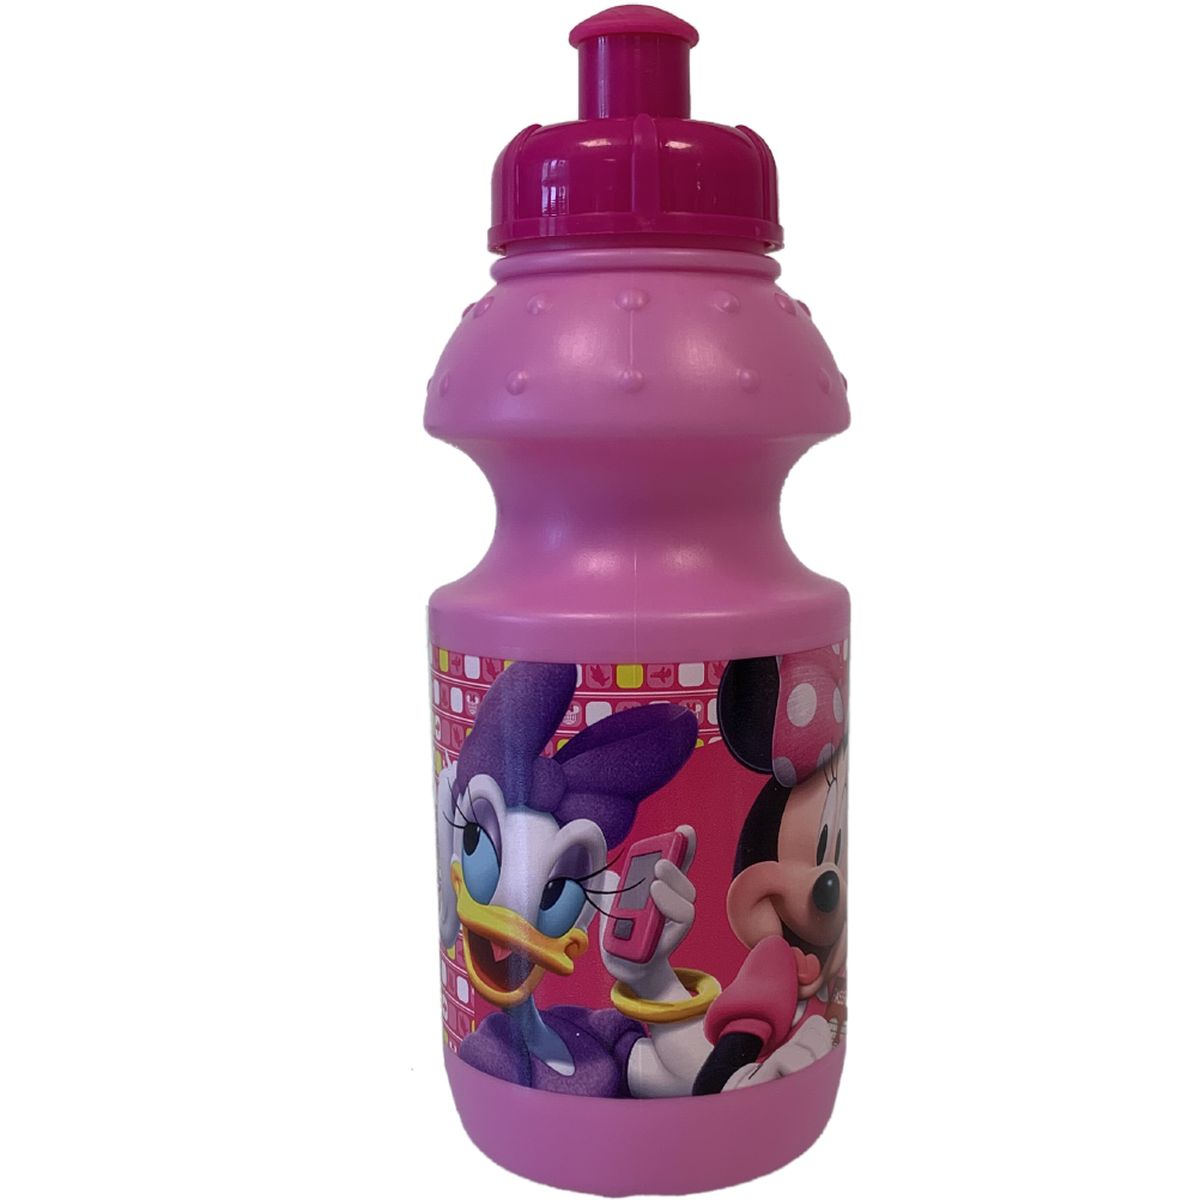 Minnie Mouse sports bottle